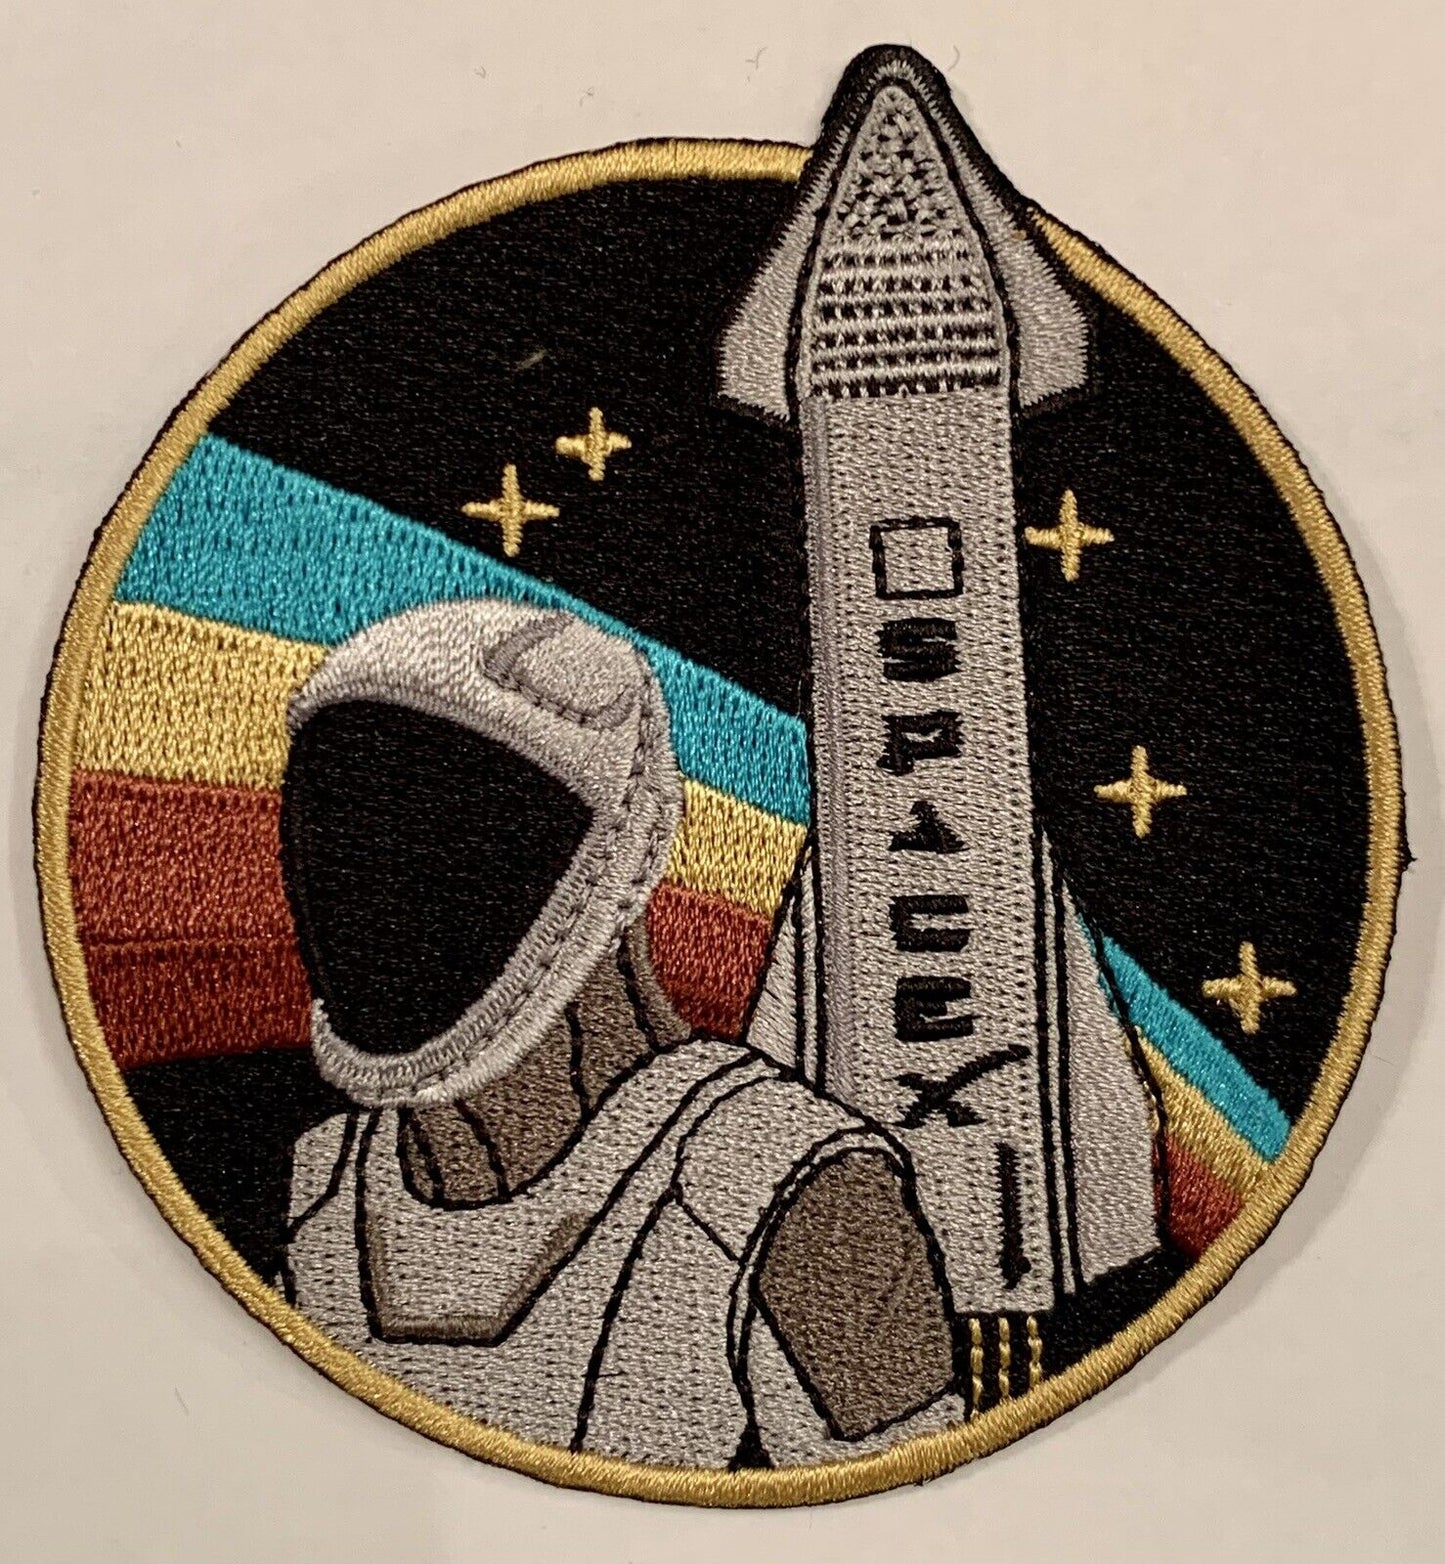 Original SpaceX ASTRONAUT AND STARSHIP - The Astronaut Patch 3.5” NASA ISS Falco